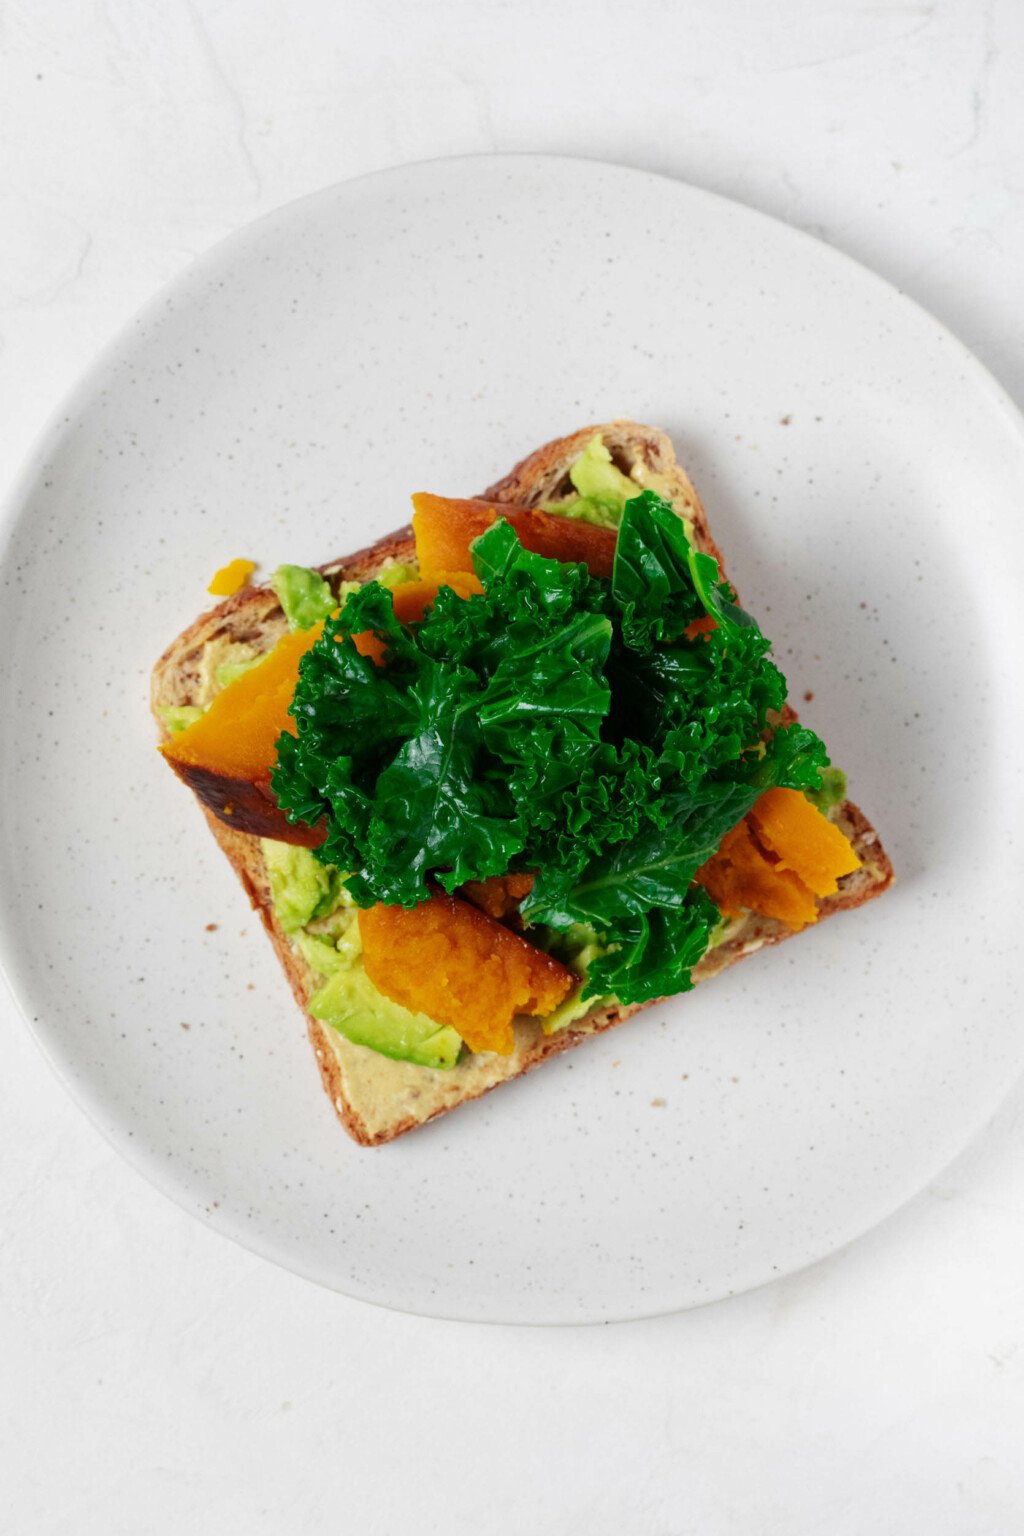 An image of a slice of avocado toast, topped with winter squash and kale.